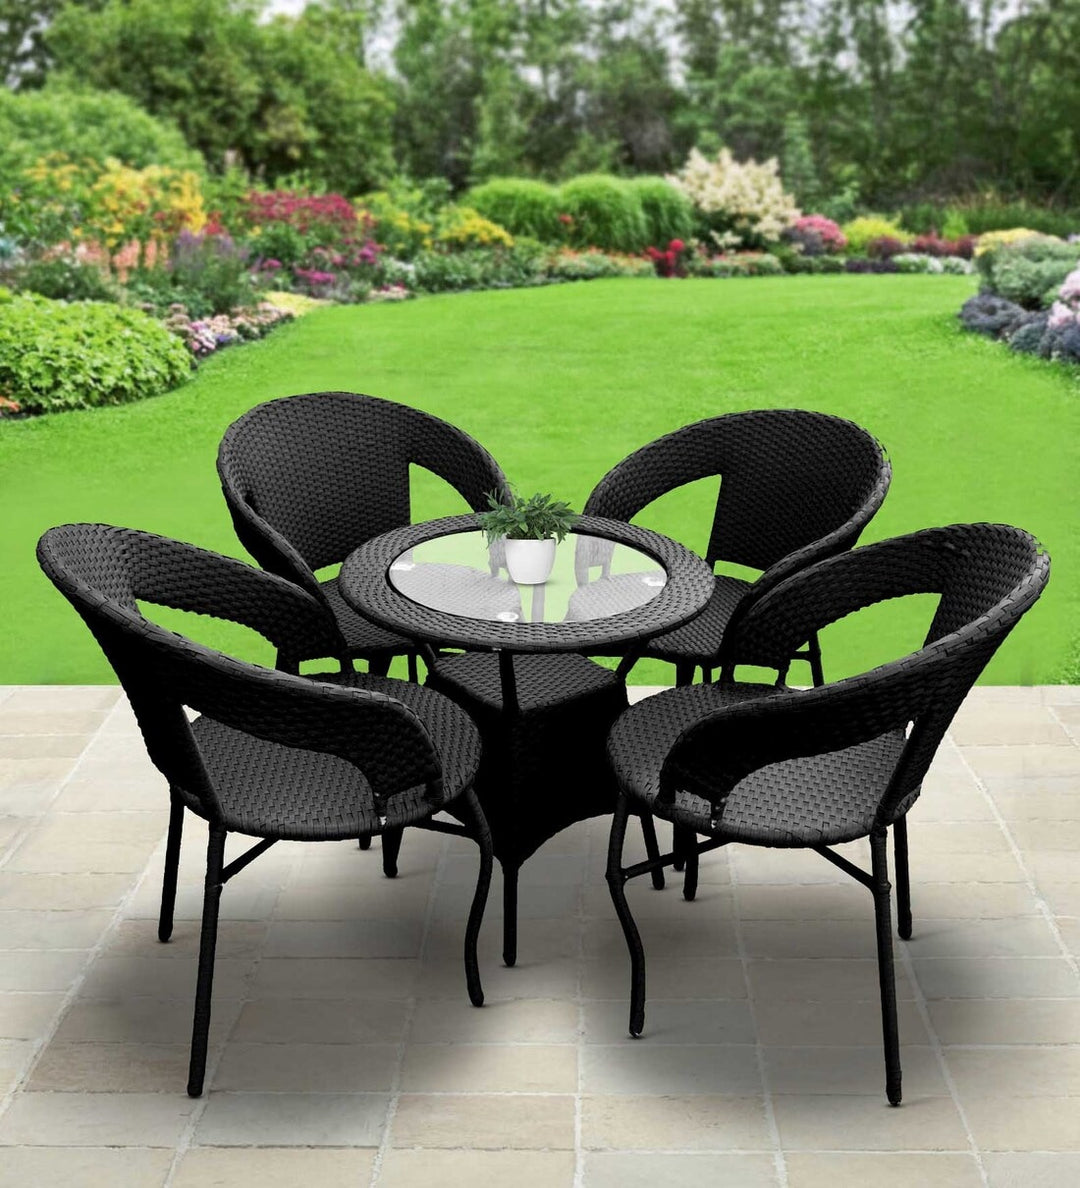 Dreamline Outdoor Furniture Garden Patio Seating Set 1+4 4 Chairs and Table Set Balcony Furniture Coffee Table Set(Black)